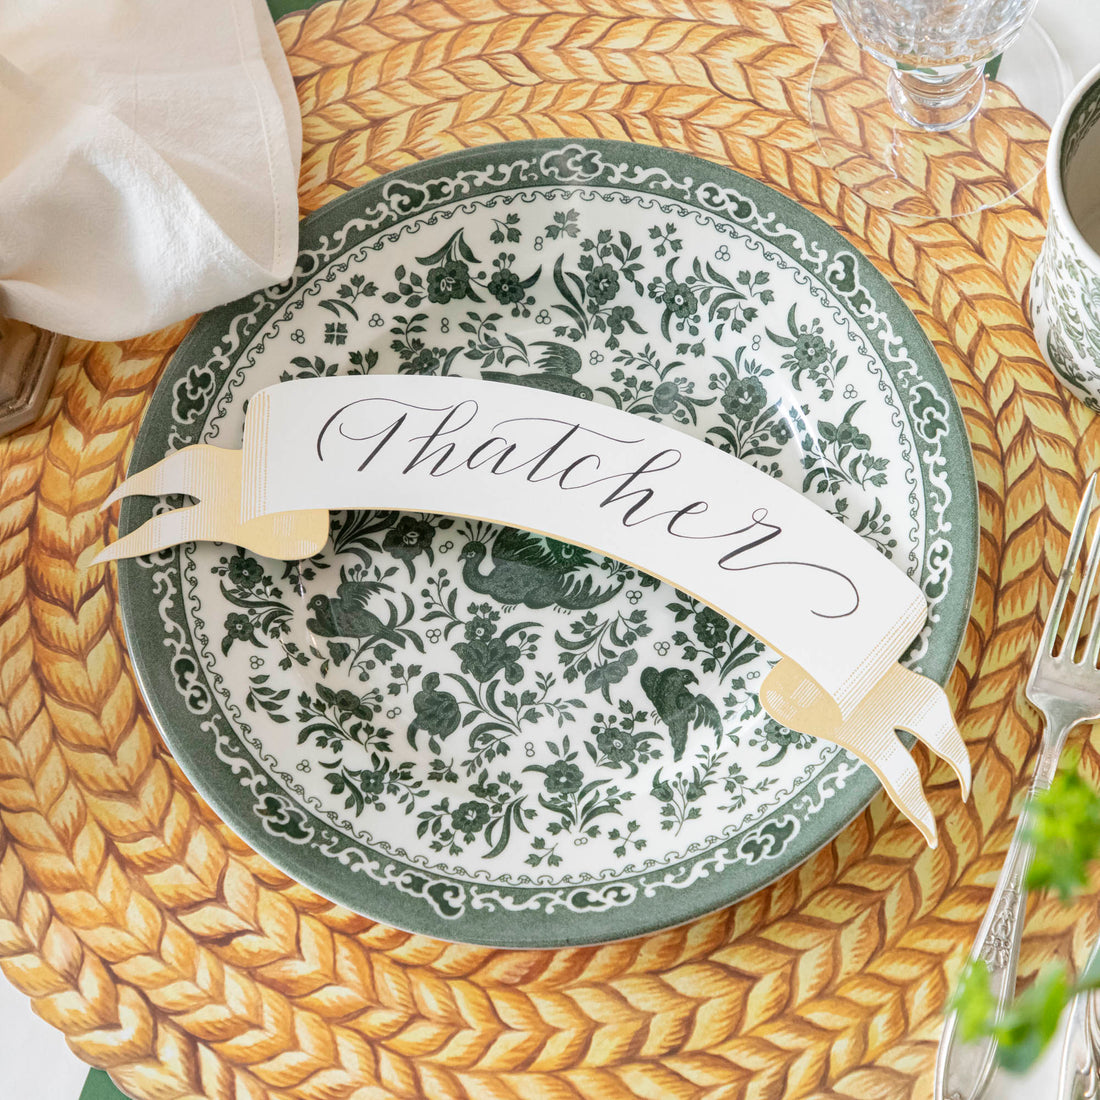 A table setting with a green and white place setting that features Burleigh&